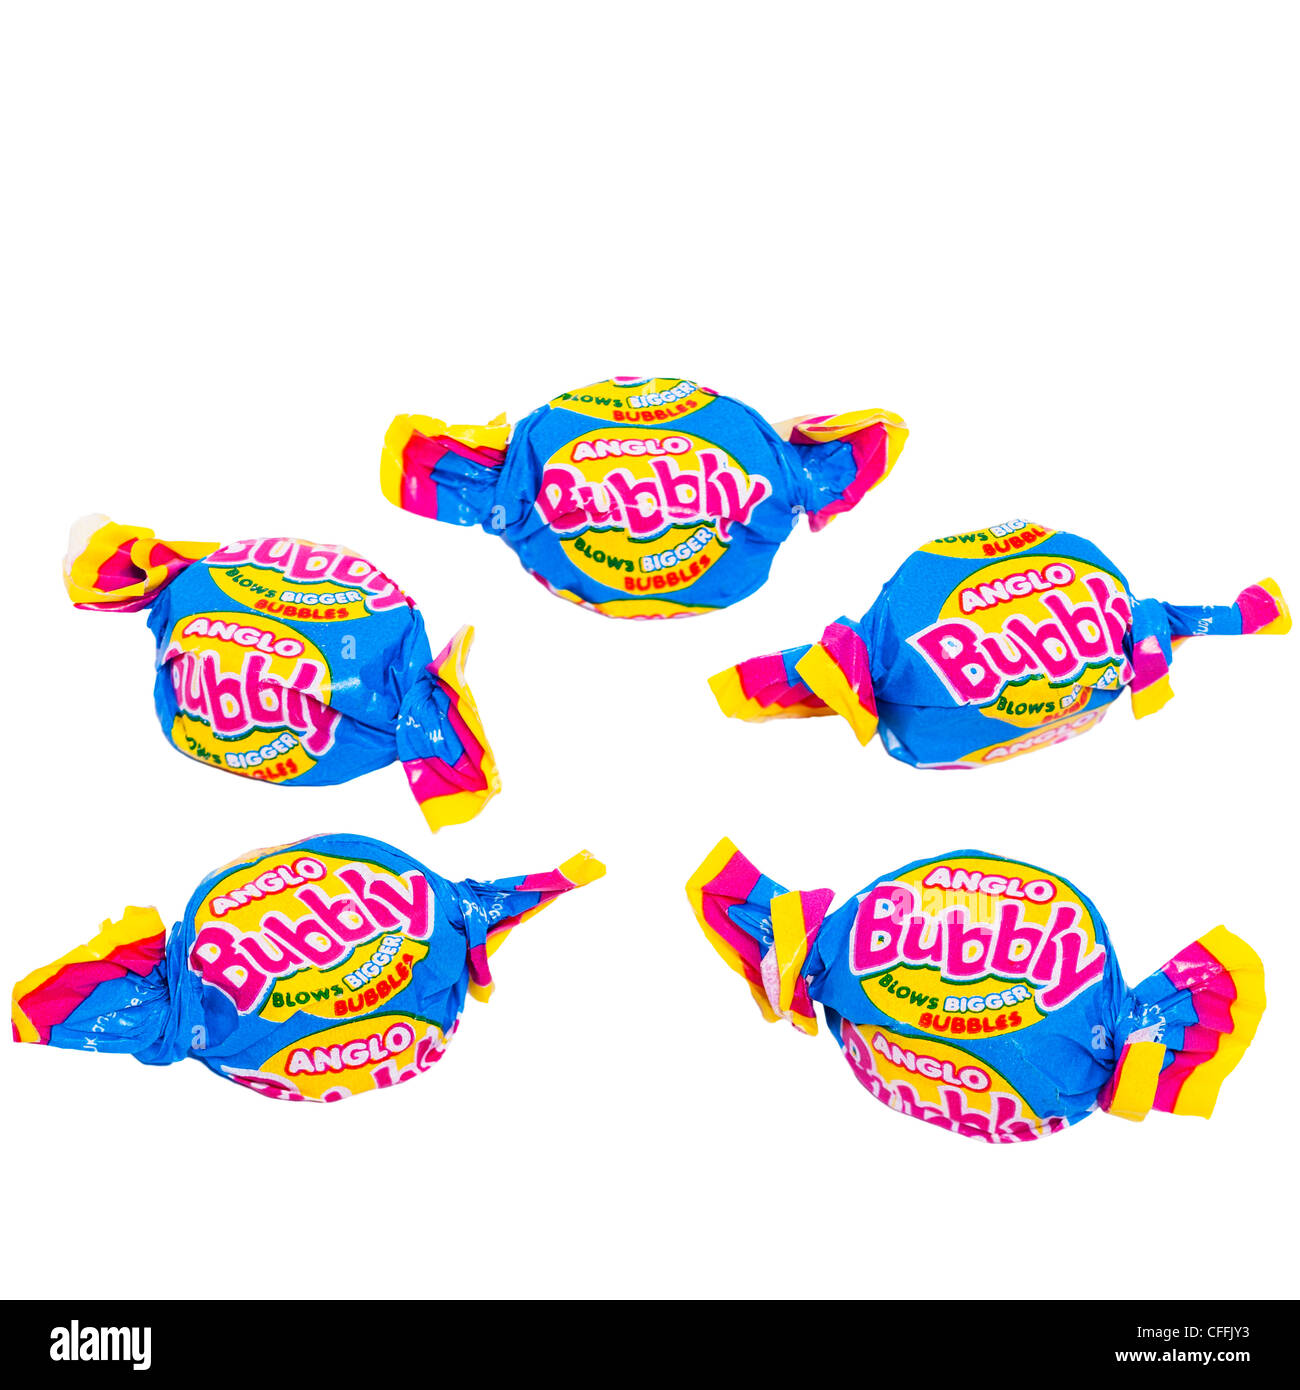 A selection of Traditional Anglo Bubbly bubble Gum on a white background Stock Photo